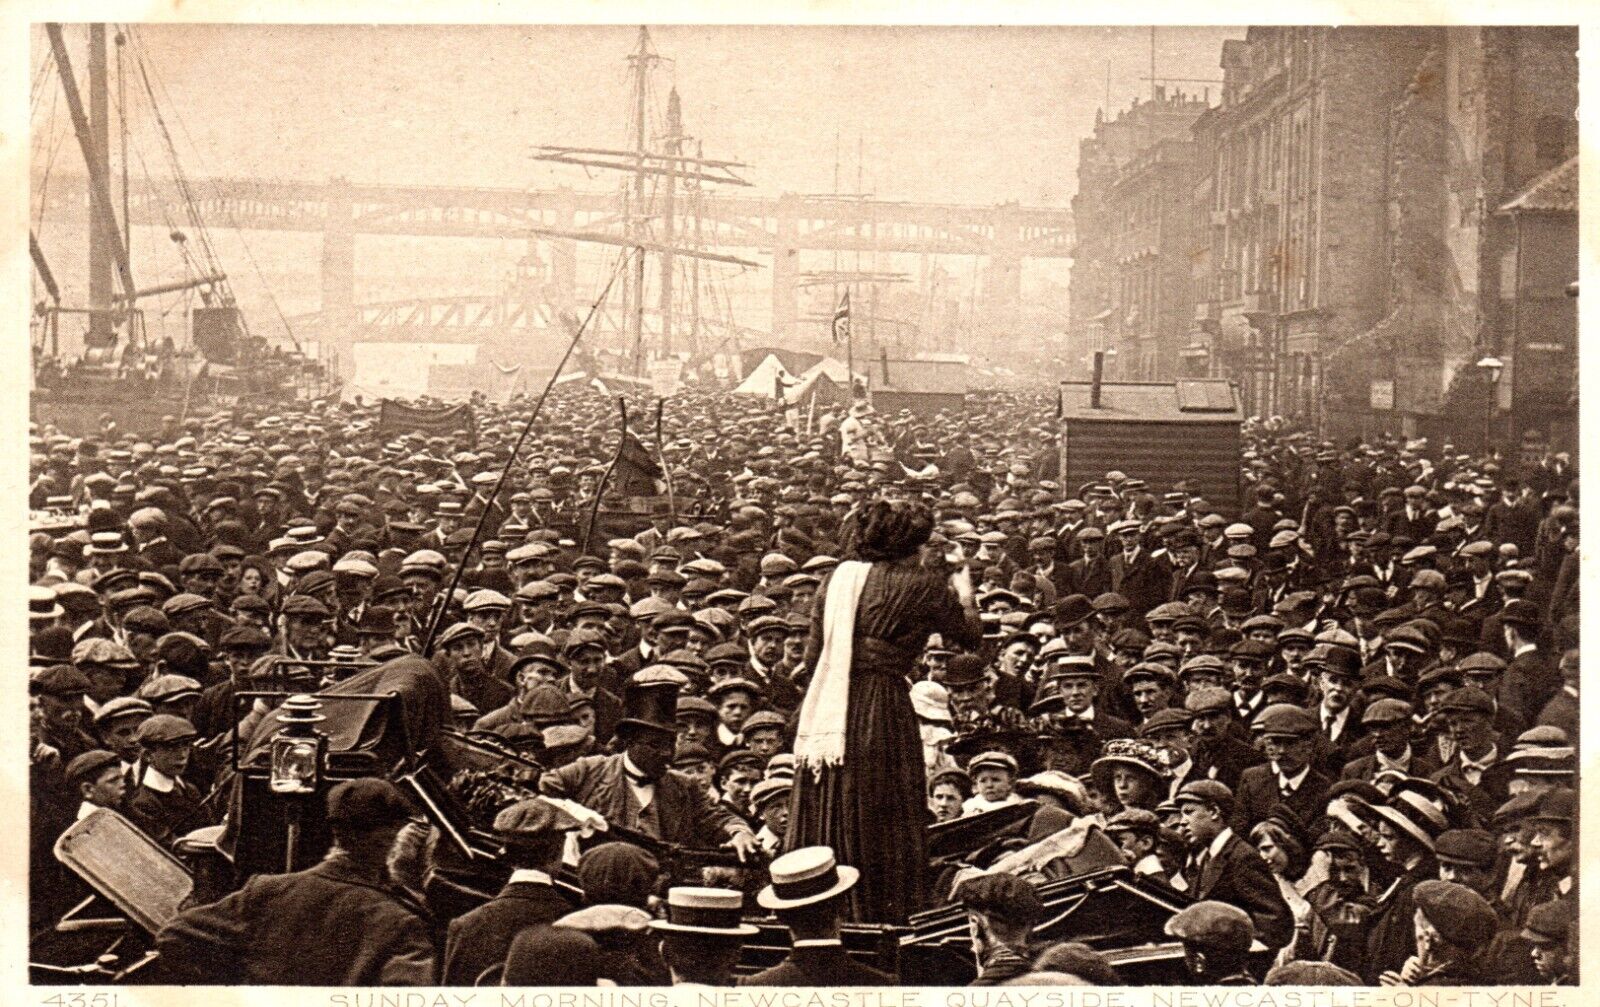 House Clearance - Newcastle-upon-Tyne: Suffragette addressing a large crowd on Quayside, 1914